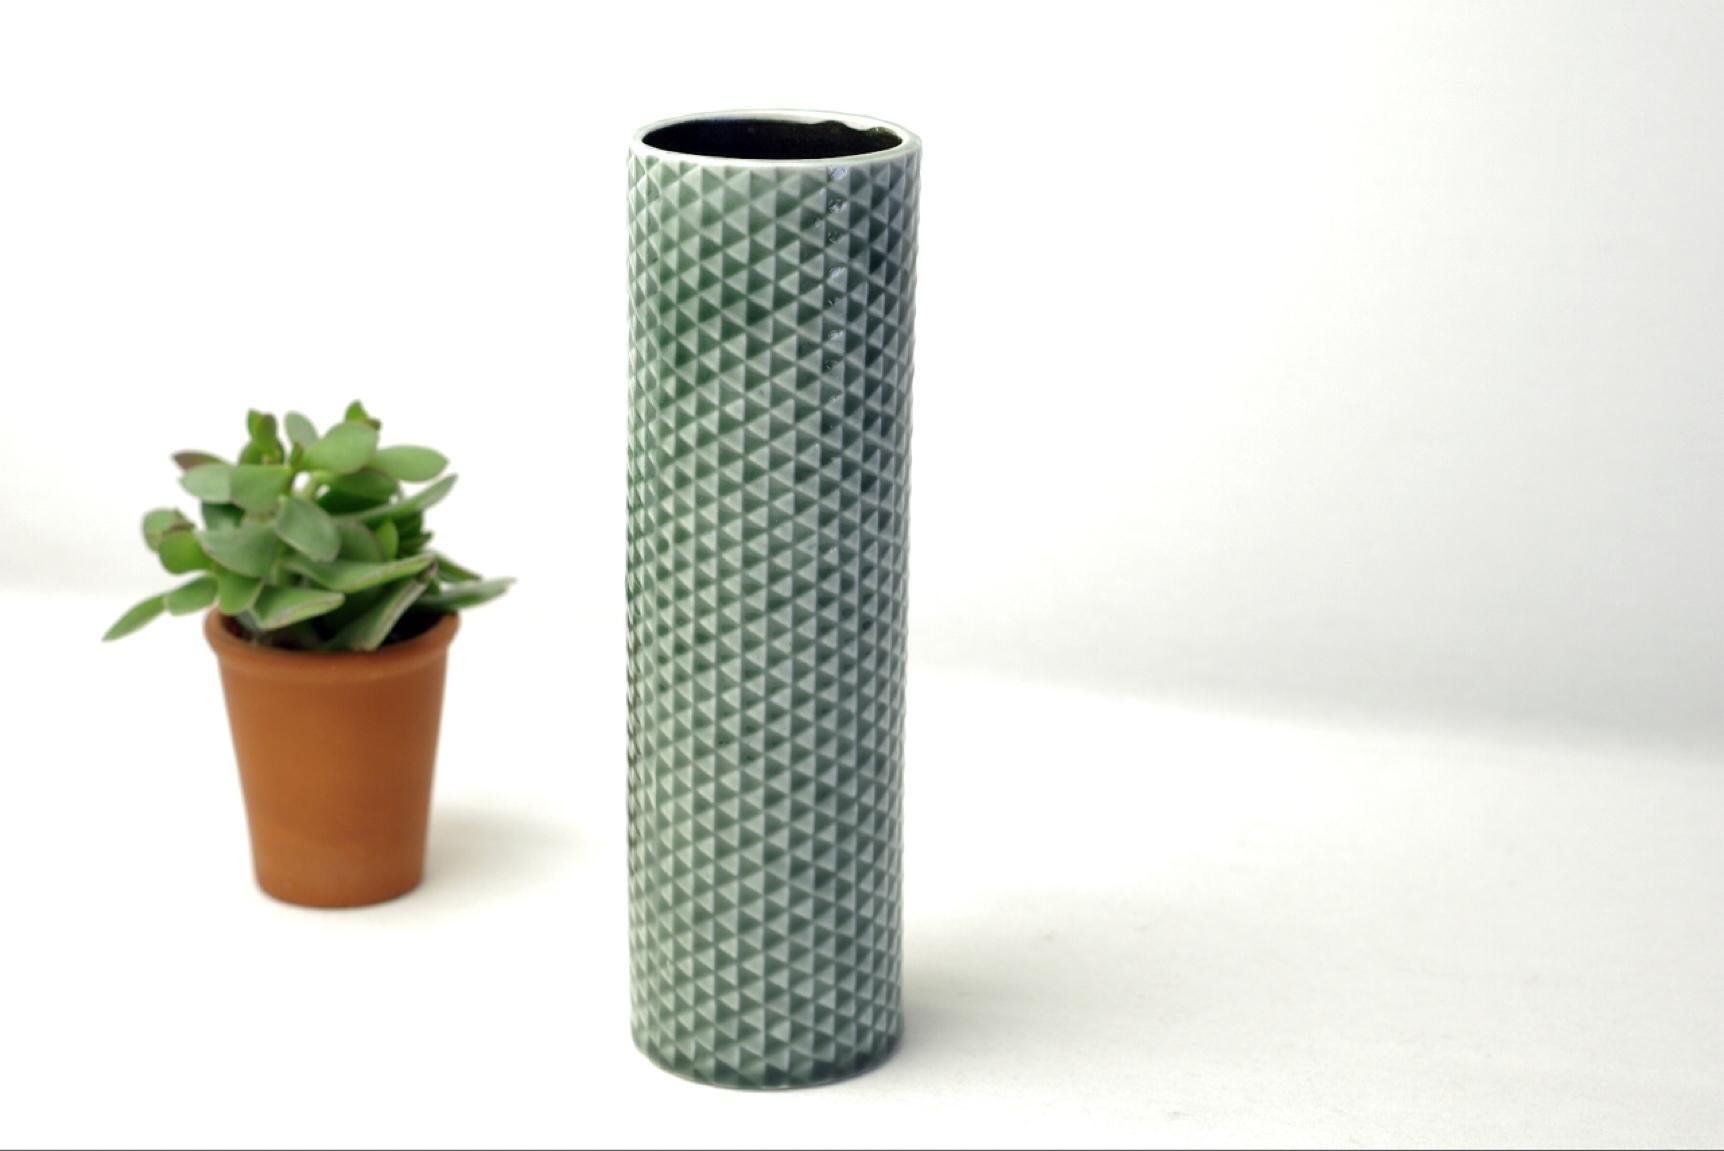 Product Description:
Stig Lindberg, the designer of this vase, gained international fame in the design exhibition held in 1955 in Helsingborg where he introduced the domino series of household earthenware. Items within the domino series are very